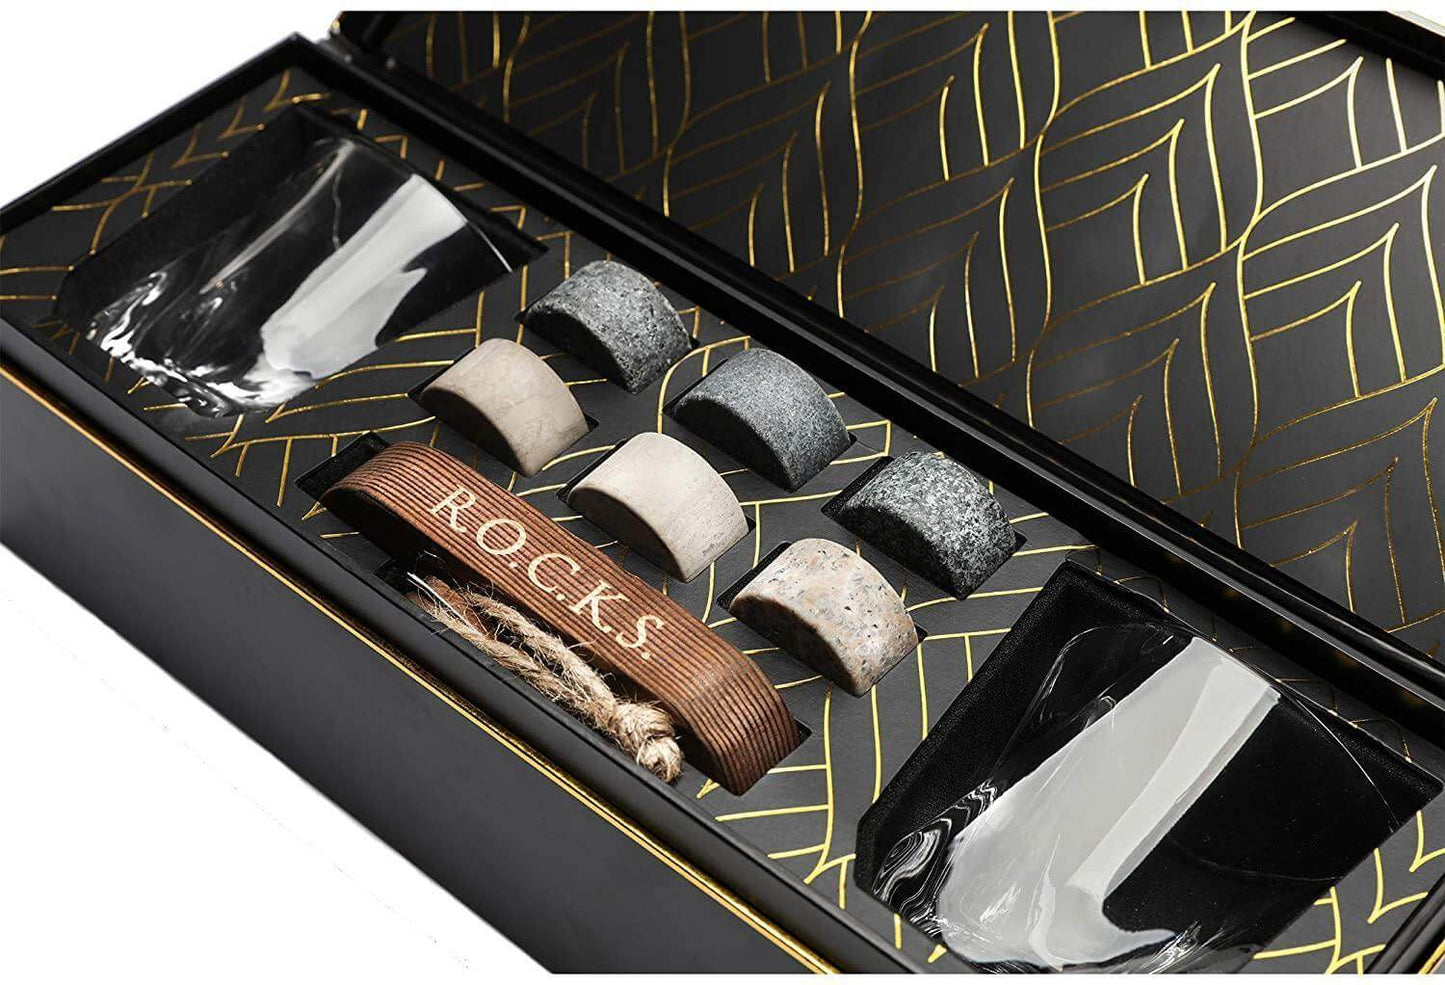 The Connoisseur'S Set- Whiskey Rocks and Twisted Glass Edition